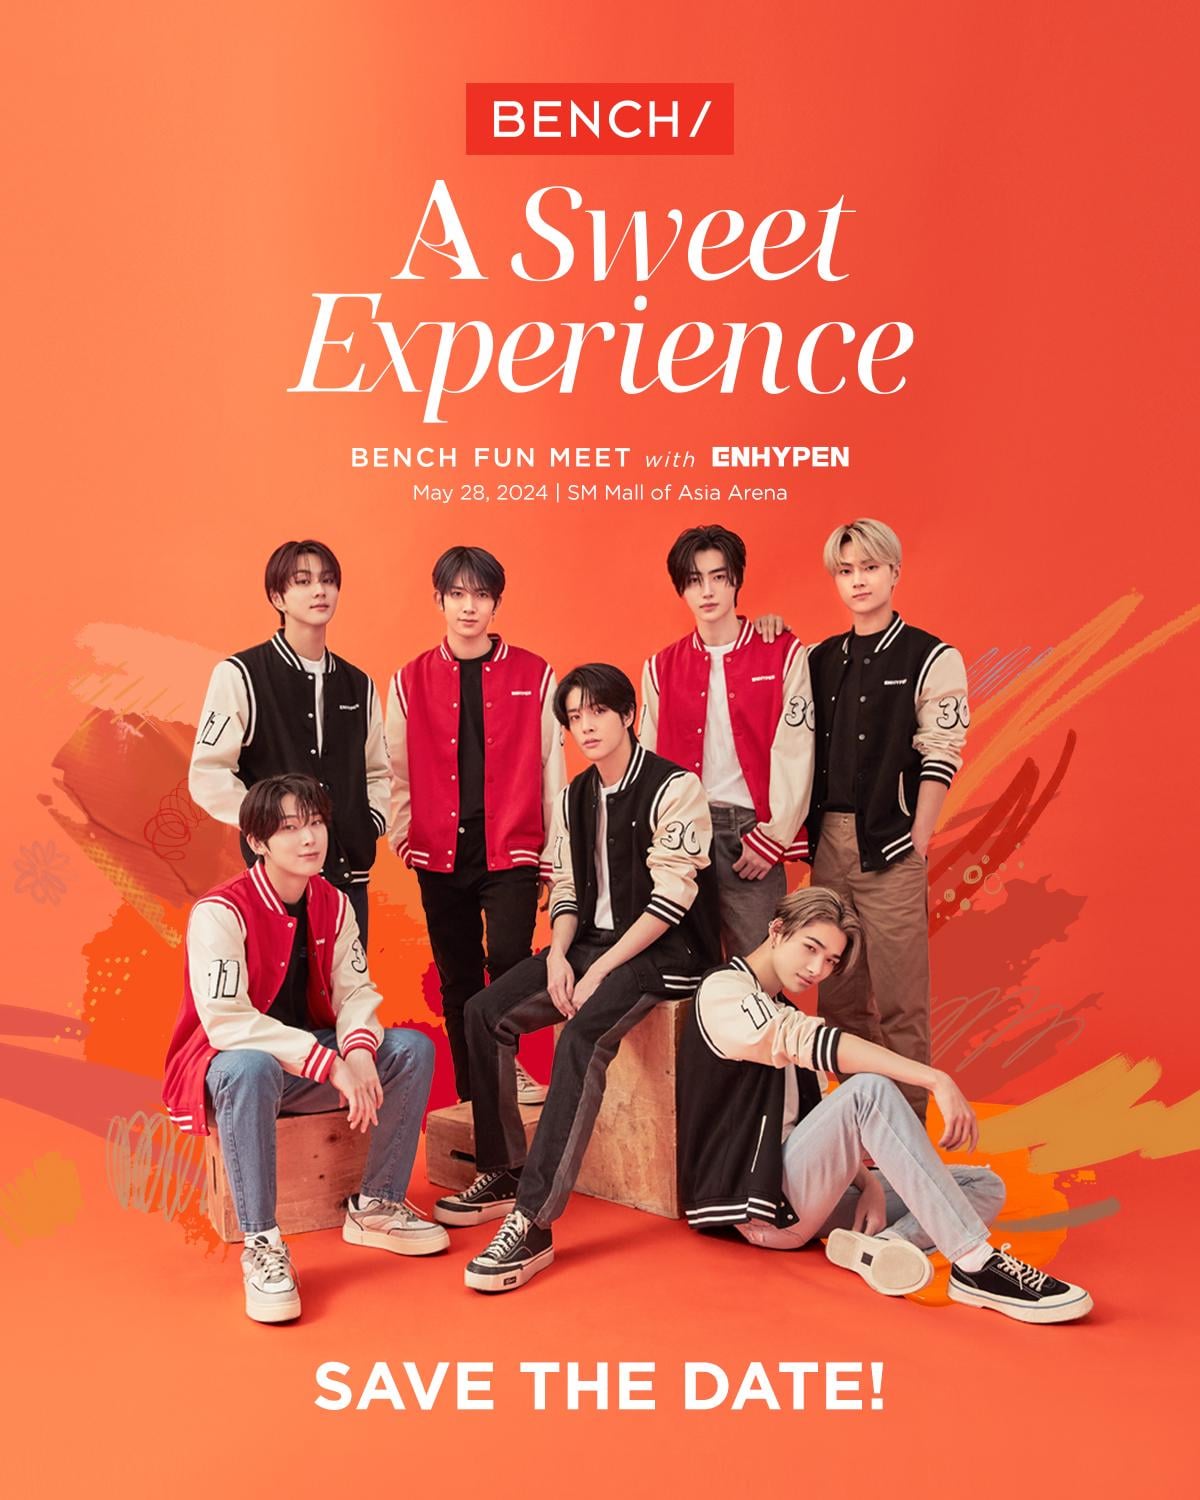 FOR FILO ENGENES!!! Clear your schedules and make way for 'A Sweet Experience' with Enhypen! May 28, 2024 at the SM Mall of Asia Arena. SAVE THE DATE!!! 📅 -Bench/ lifestyle + clothing